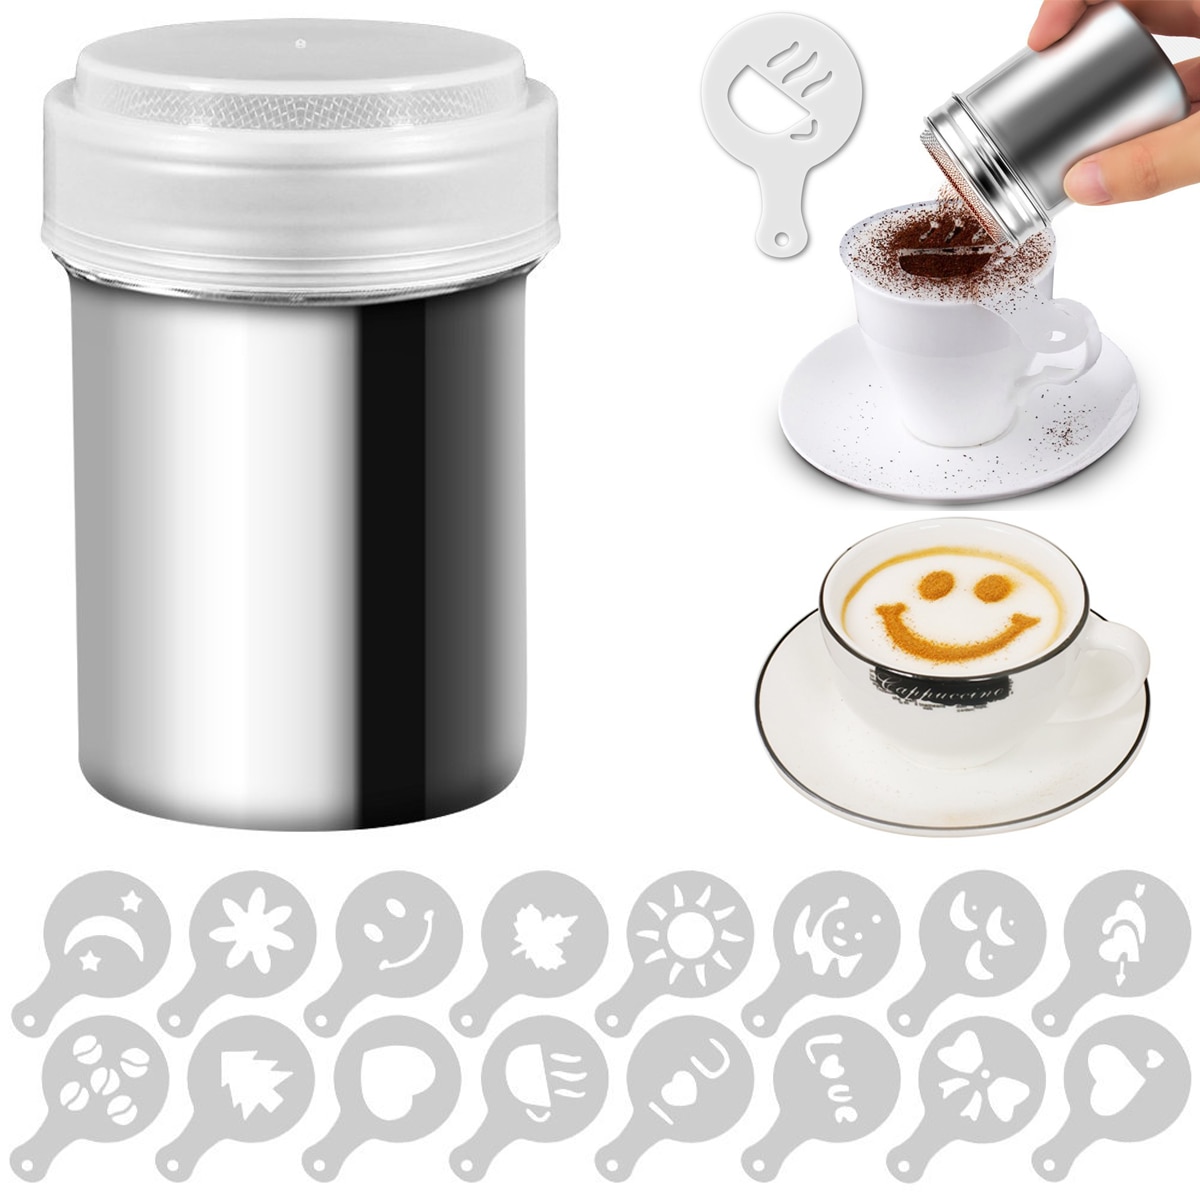 Rvs Chocolade Shaker Cacao Meel Koffie Zifter 8/16Pcs Cappuccino Template Strooi Pad Duster Spray Gereedschap d30